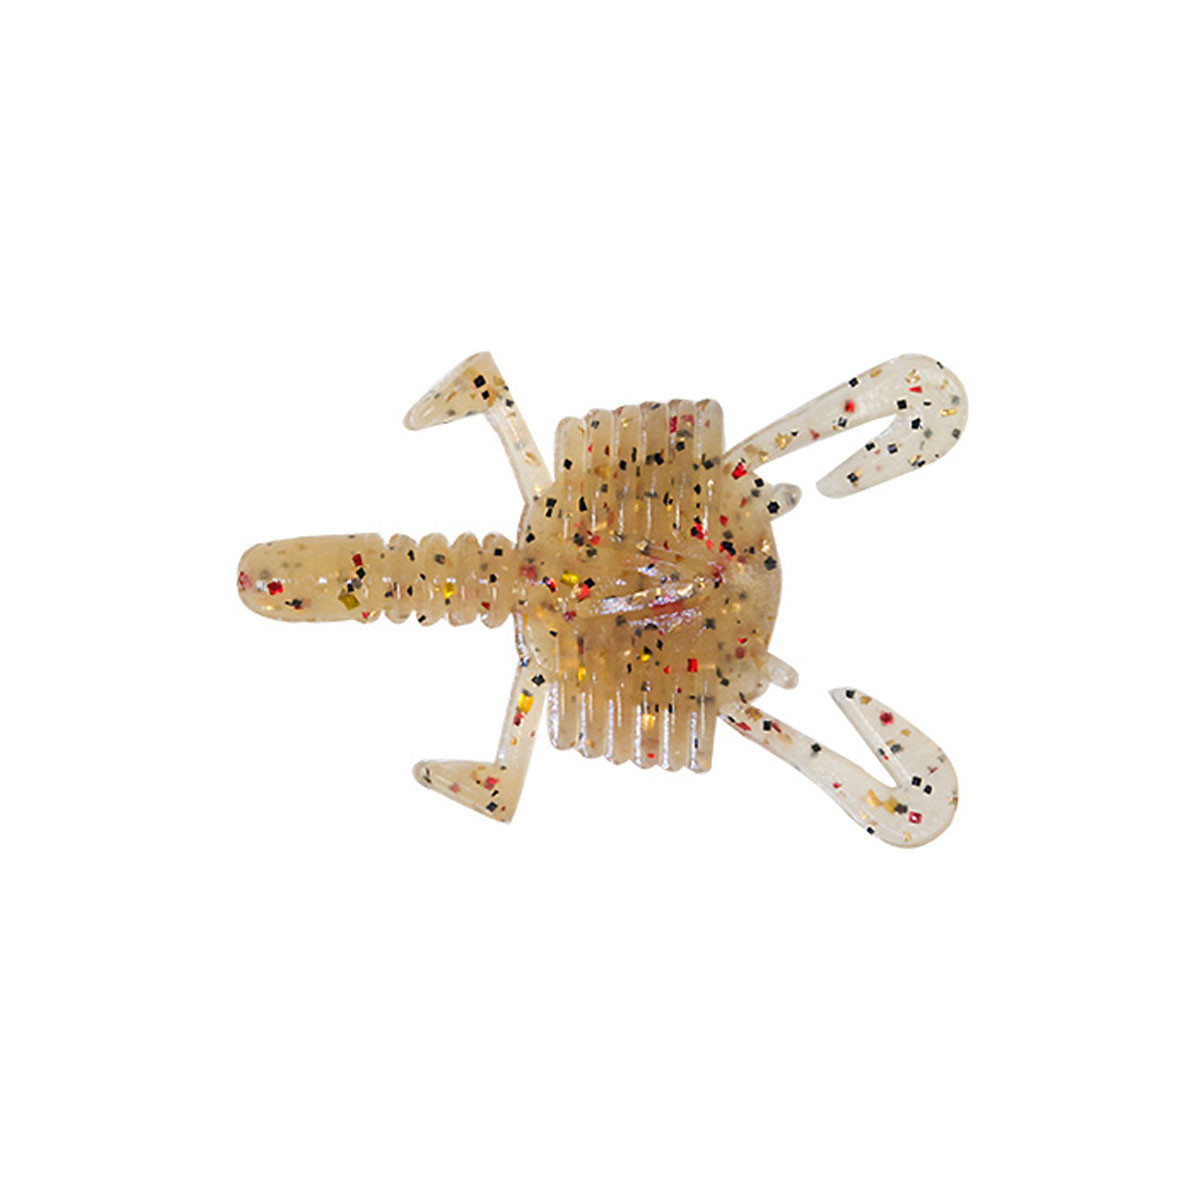 REINS SMALL CRAB 1.5"